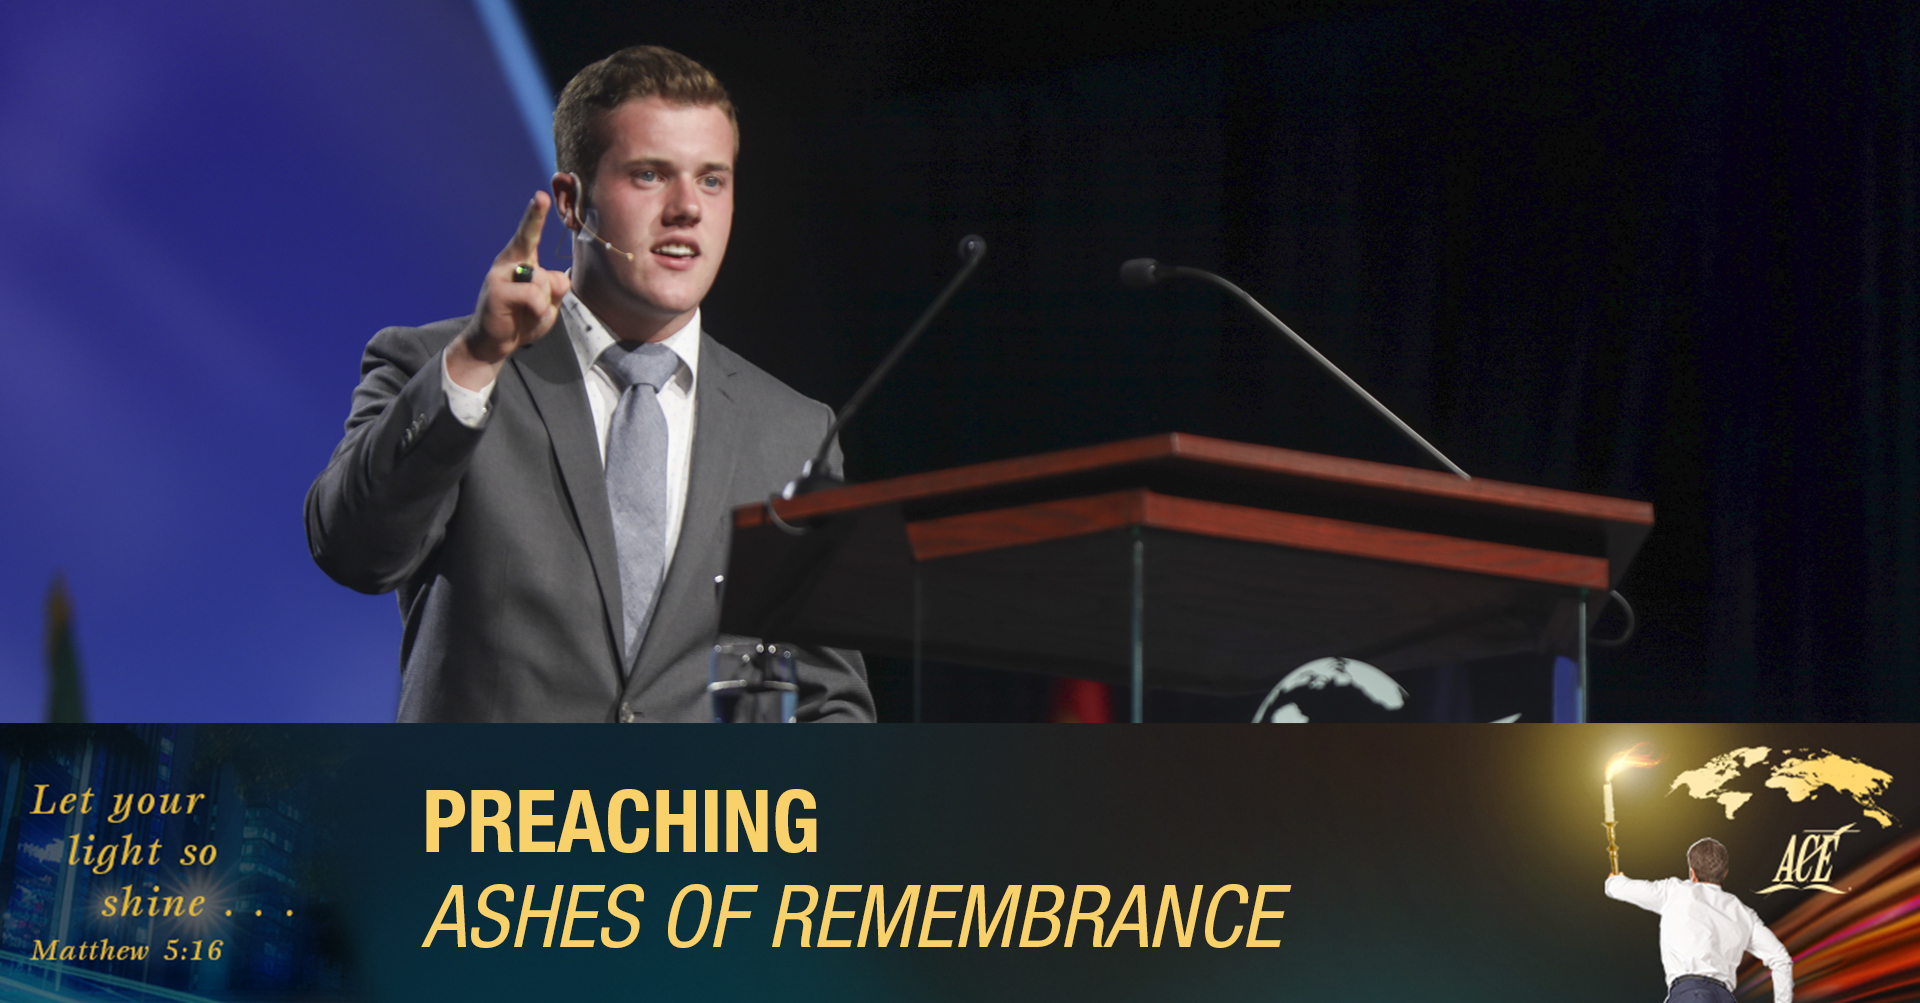 Preaching, "Ashes of Remembrance" - ISC 2019